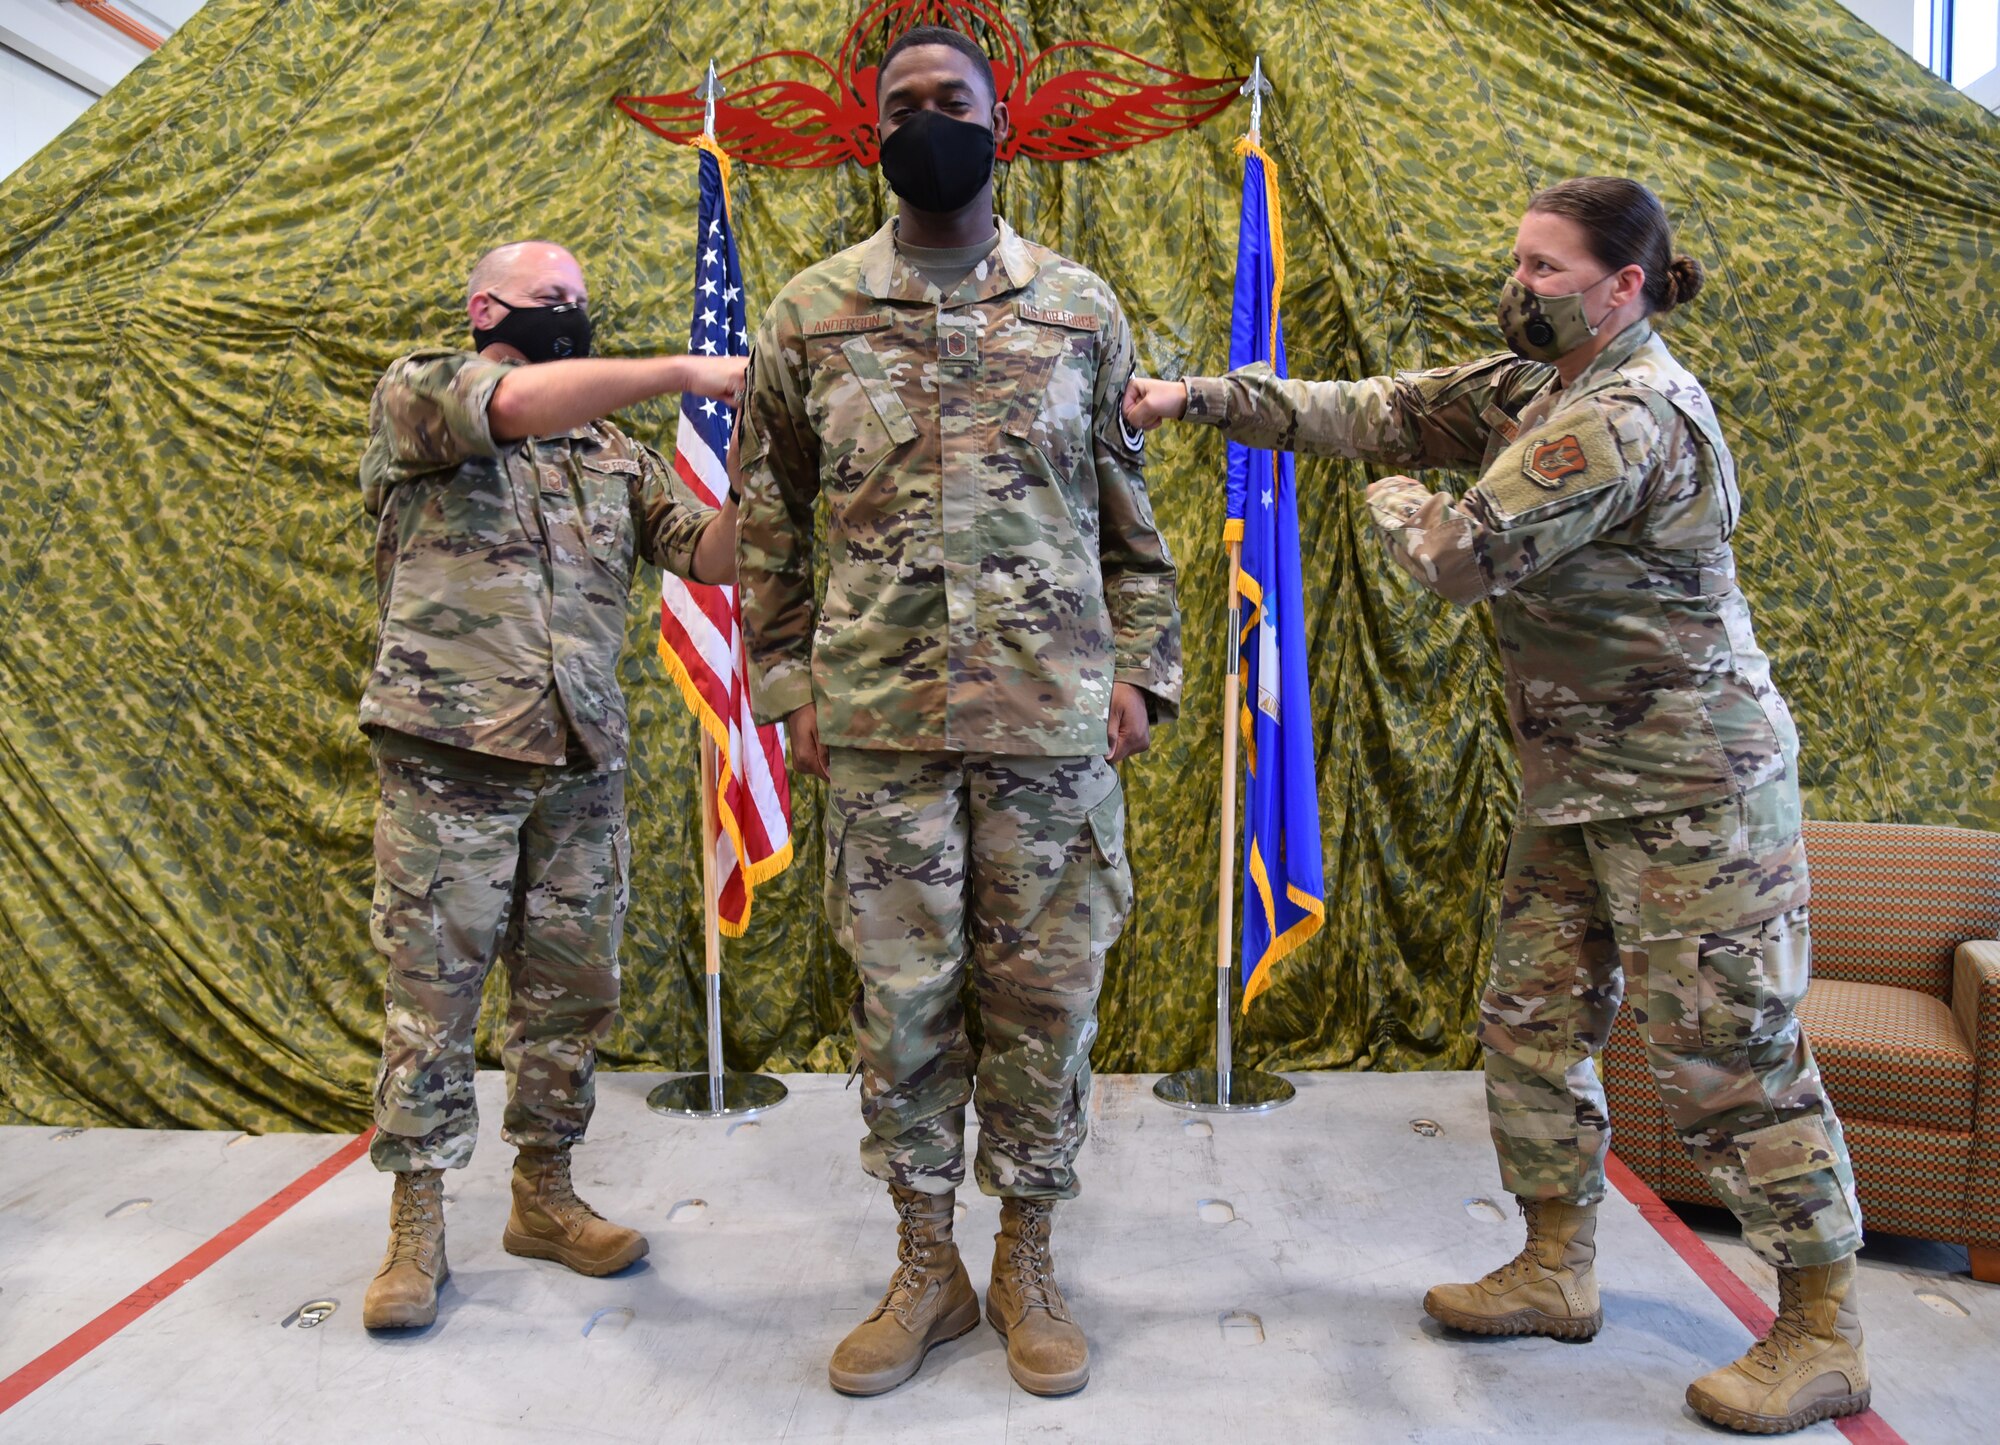 Chief Master Sgts. Monte Snyder, 403rd Maintenance Group maintenance operations superintendent (left) and Amanda Stift, 403rd Wing command chief, (right) "pin" the Chief Master Sgt. rank onto Senior Master Sgt. Larry Andersen, Superintendent, 403rd Wing Mission Support Group during his promotion ceremony August 8, 2020 at the 41st Aerial Port Squadron building, Keesler Air Force Base, Miss. (U.S. Air Force Photo by Tech. Sgt. Michael Farrar)